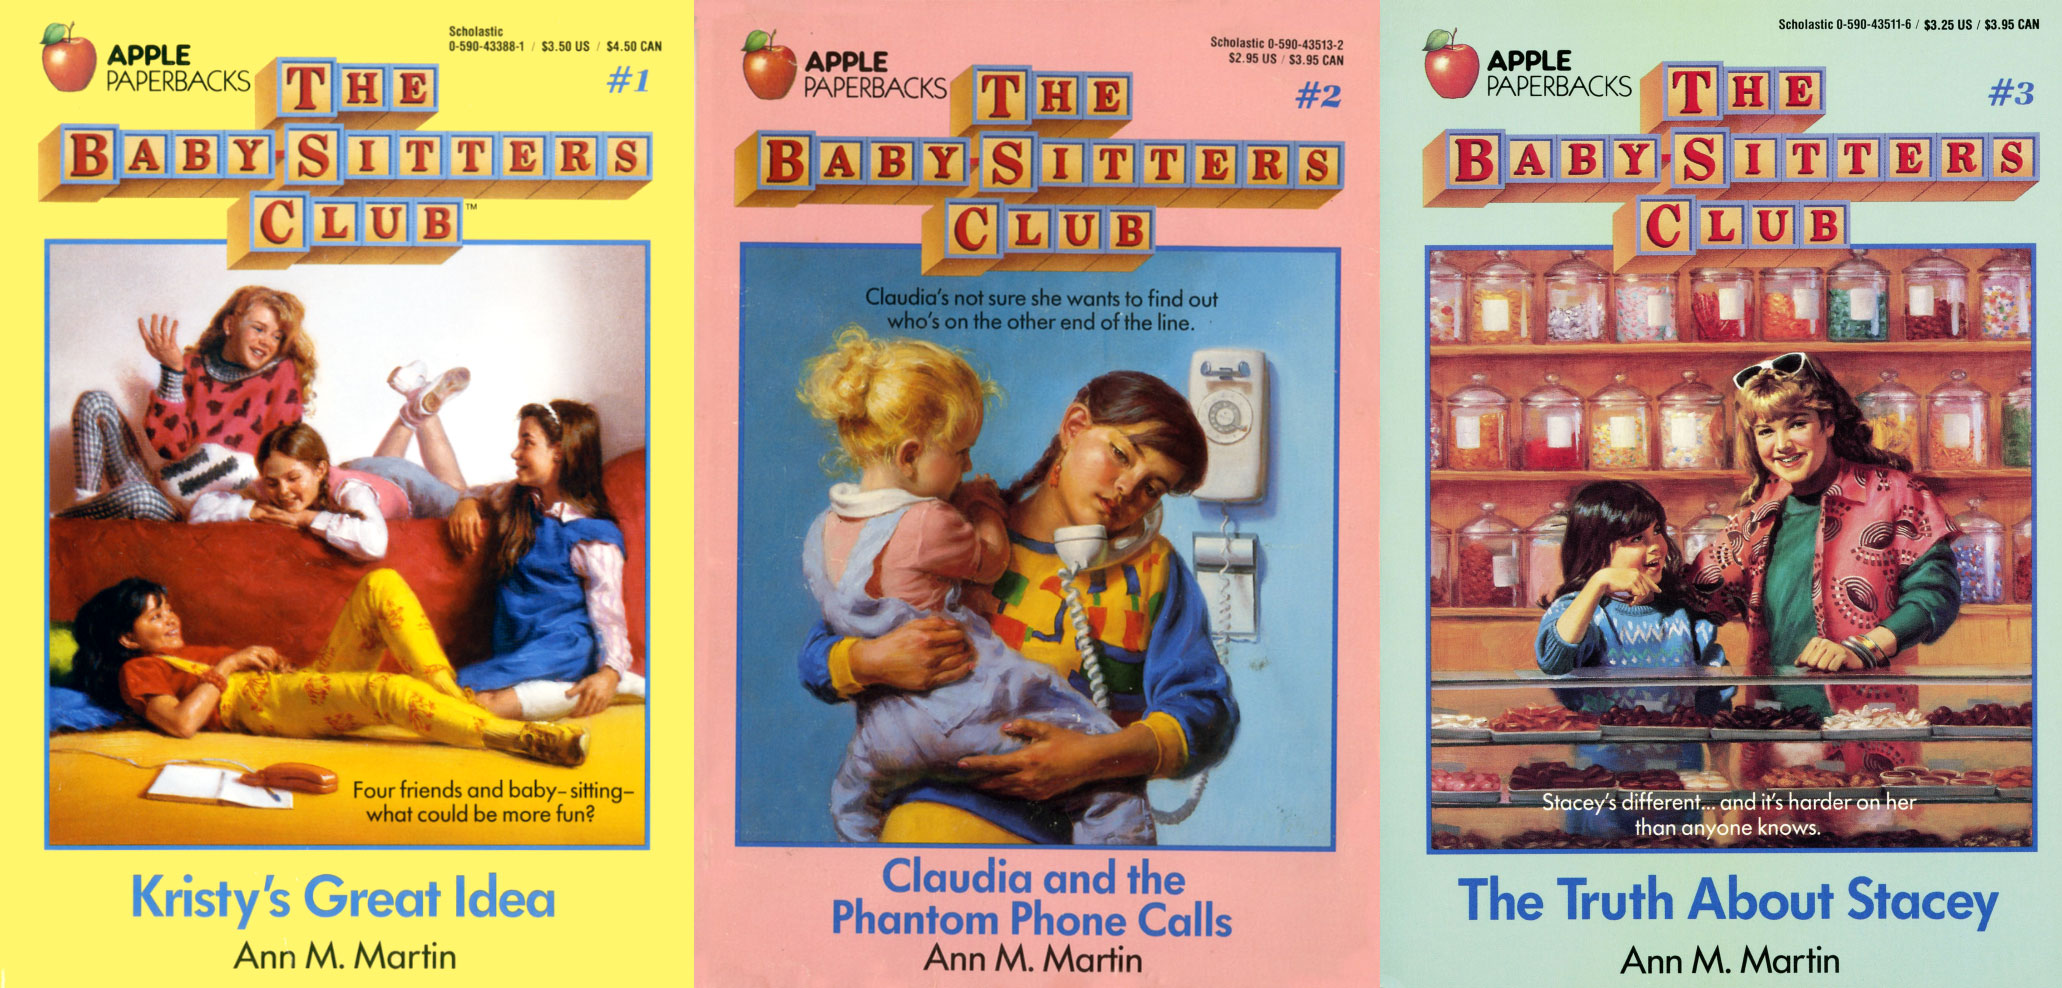 Martin The Baby Sitters Club Film More Than Just Friends- Best friends 1995 Children  Drama -Tshirt For Men And Women Ann M